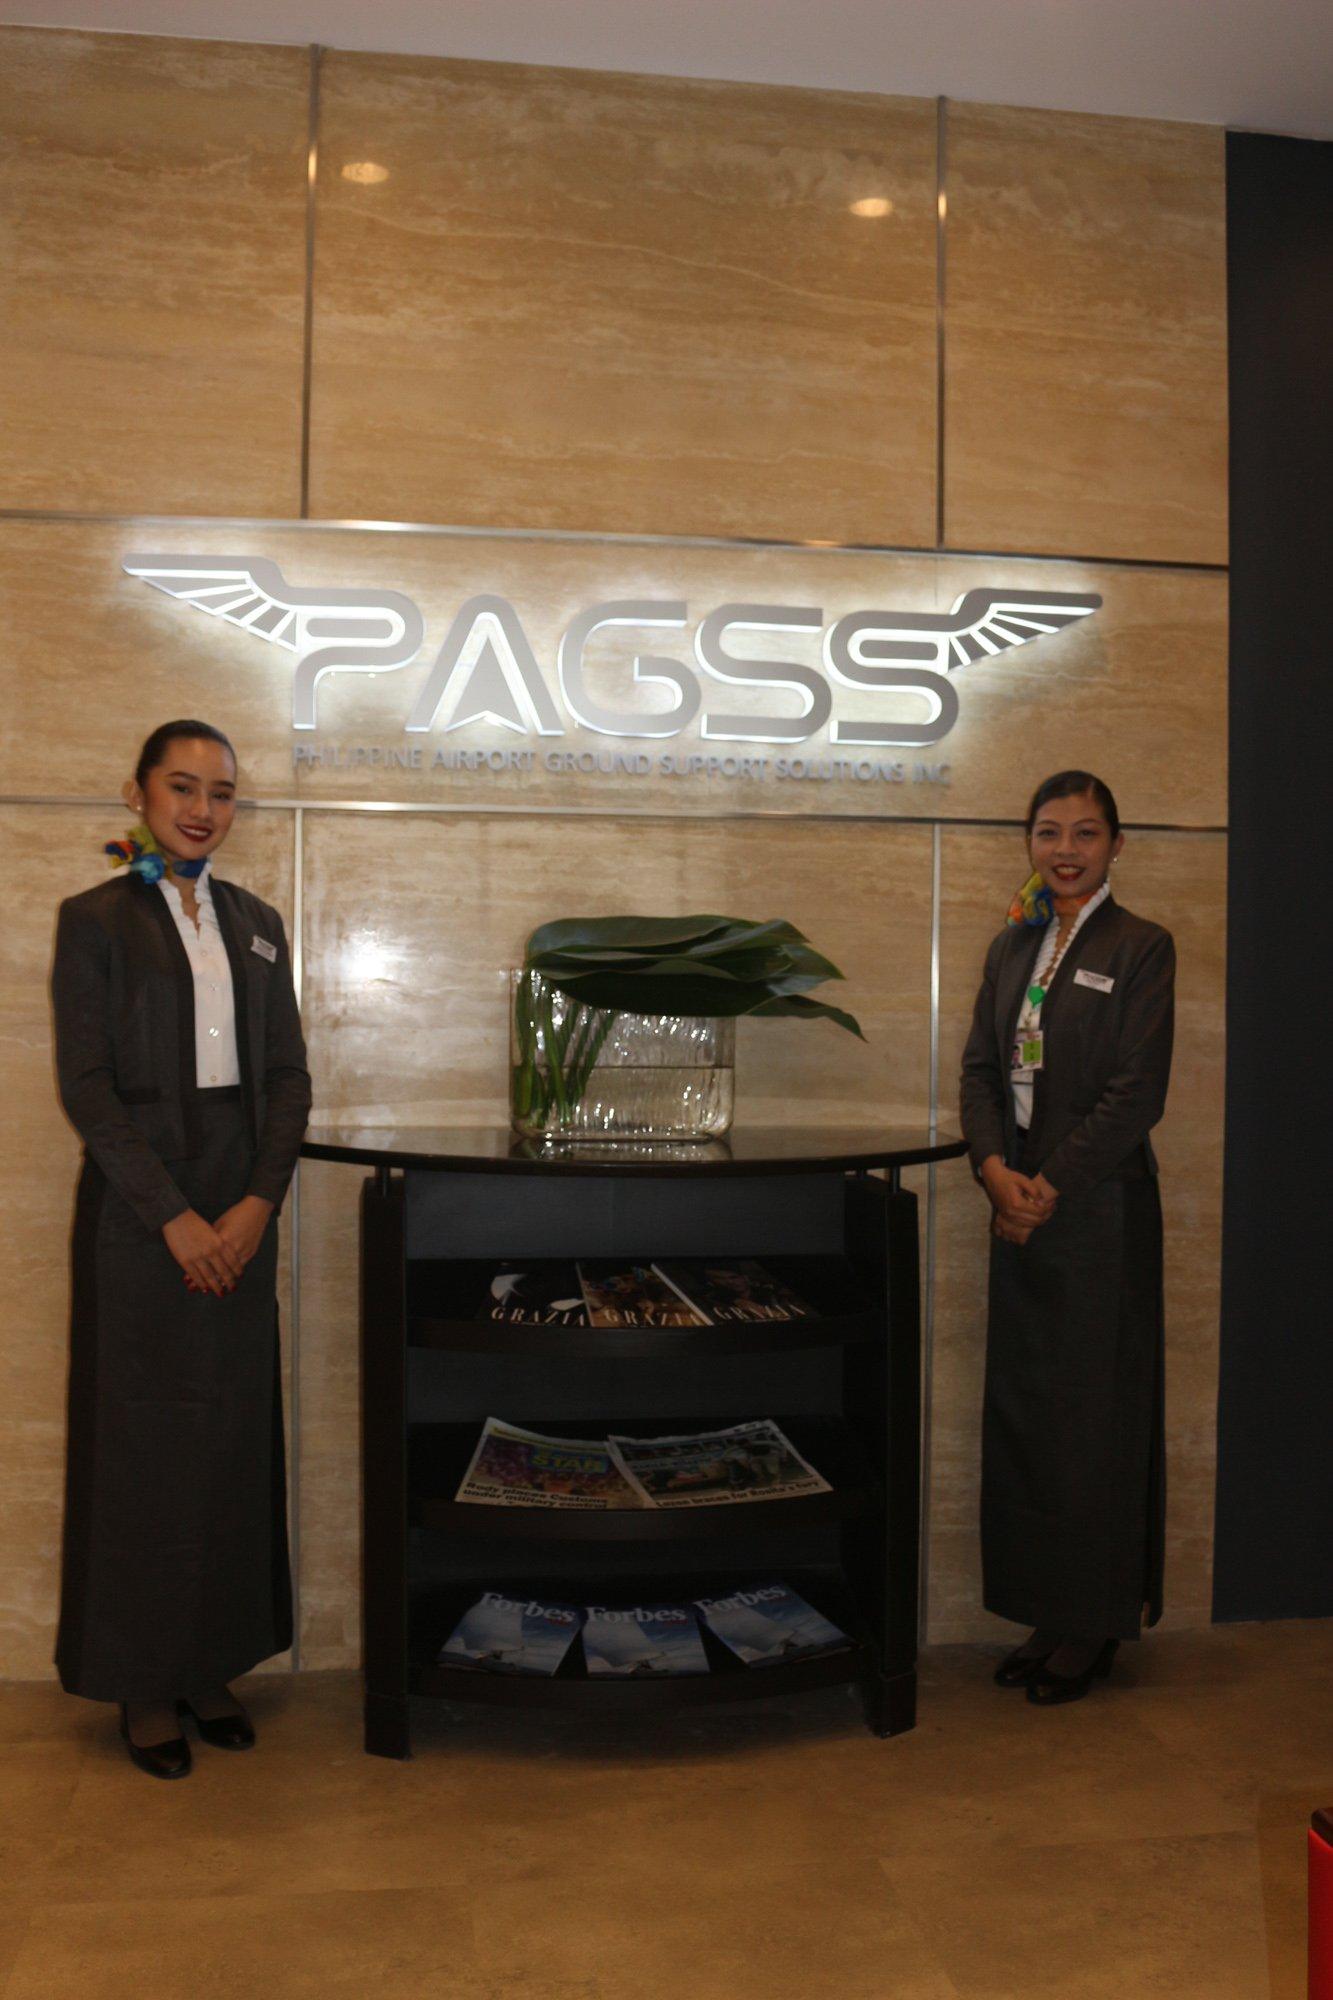 PAGSS Lounge (Gate 7) image 22 of 41